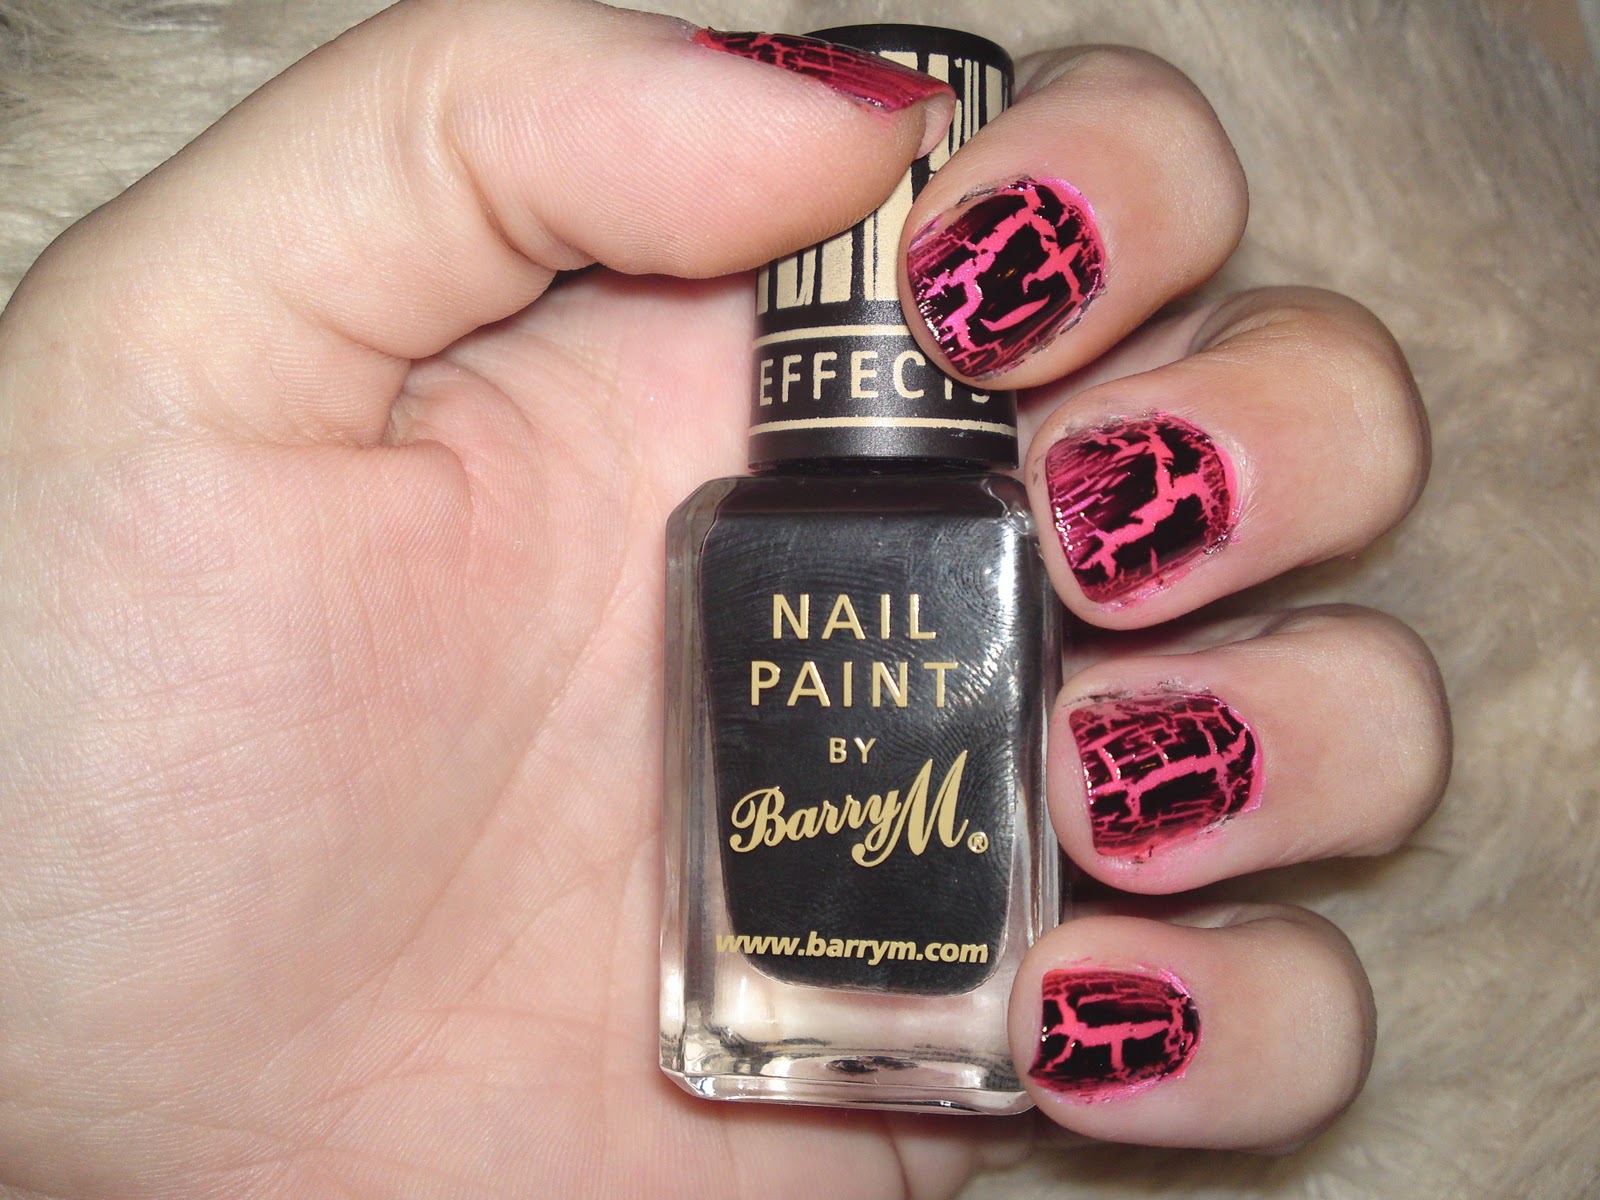 And even better than that I have 1 bottle of Barry M Instant Nail Effect and